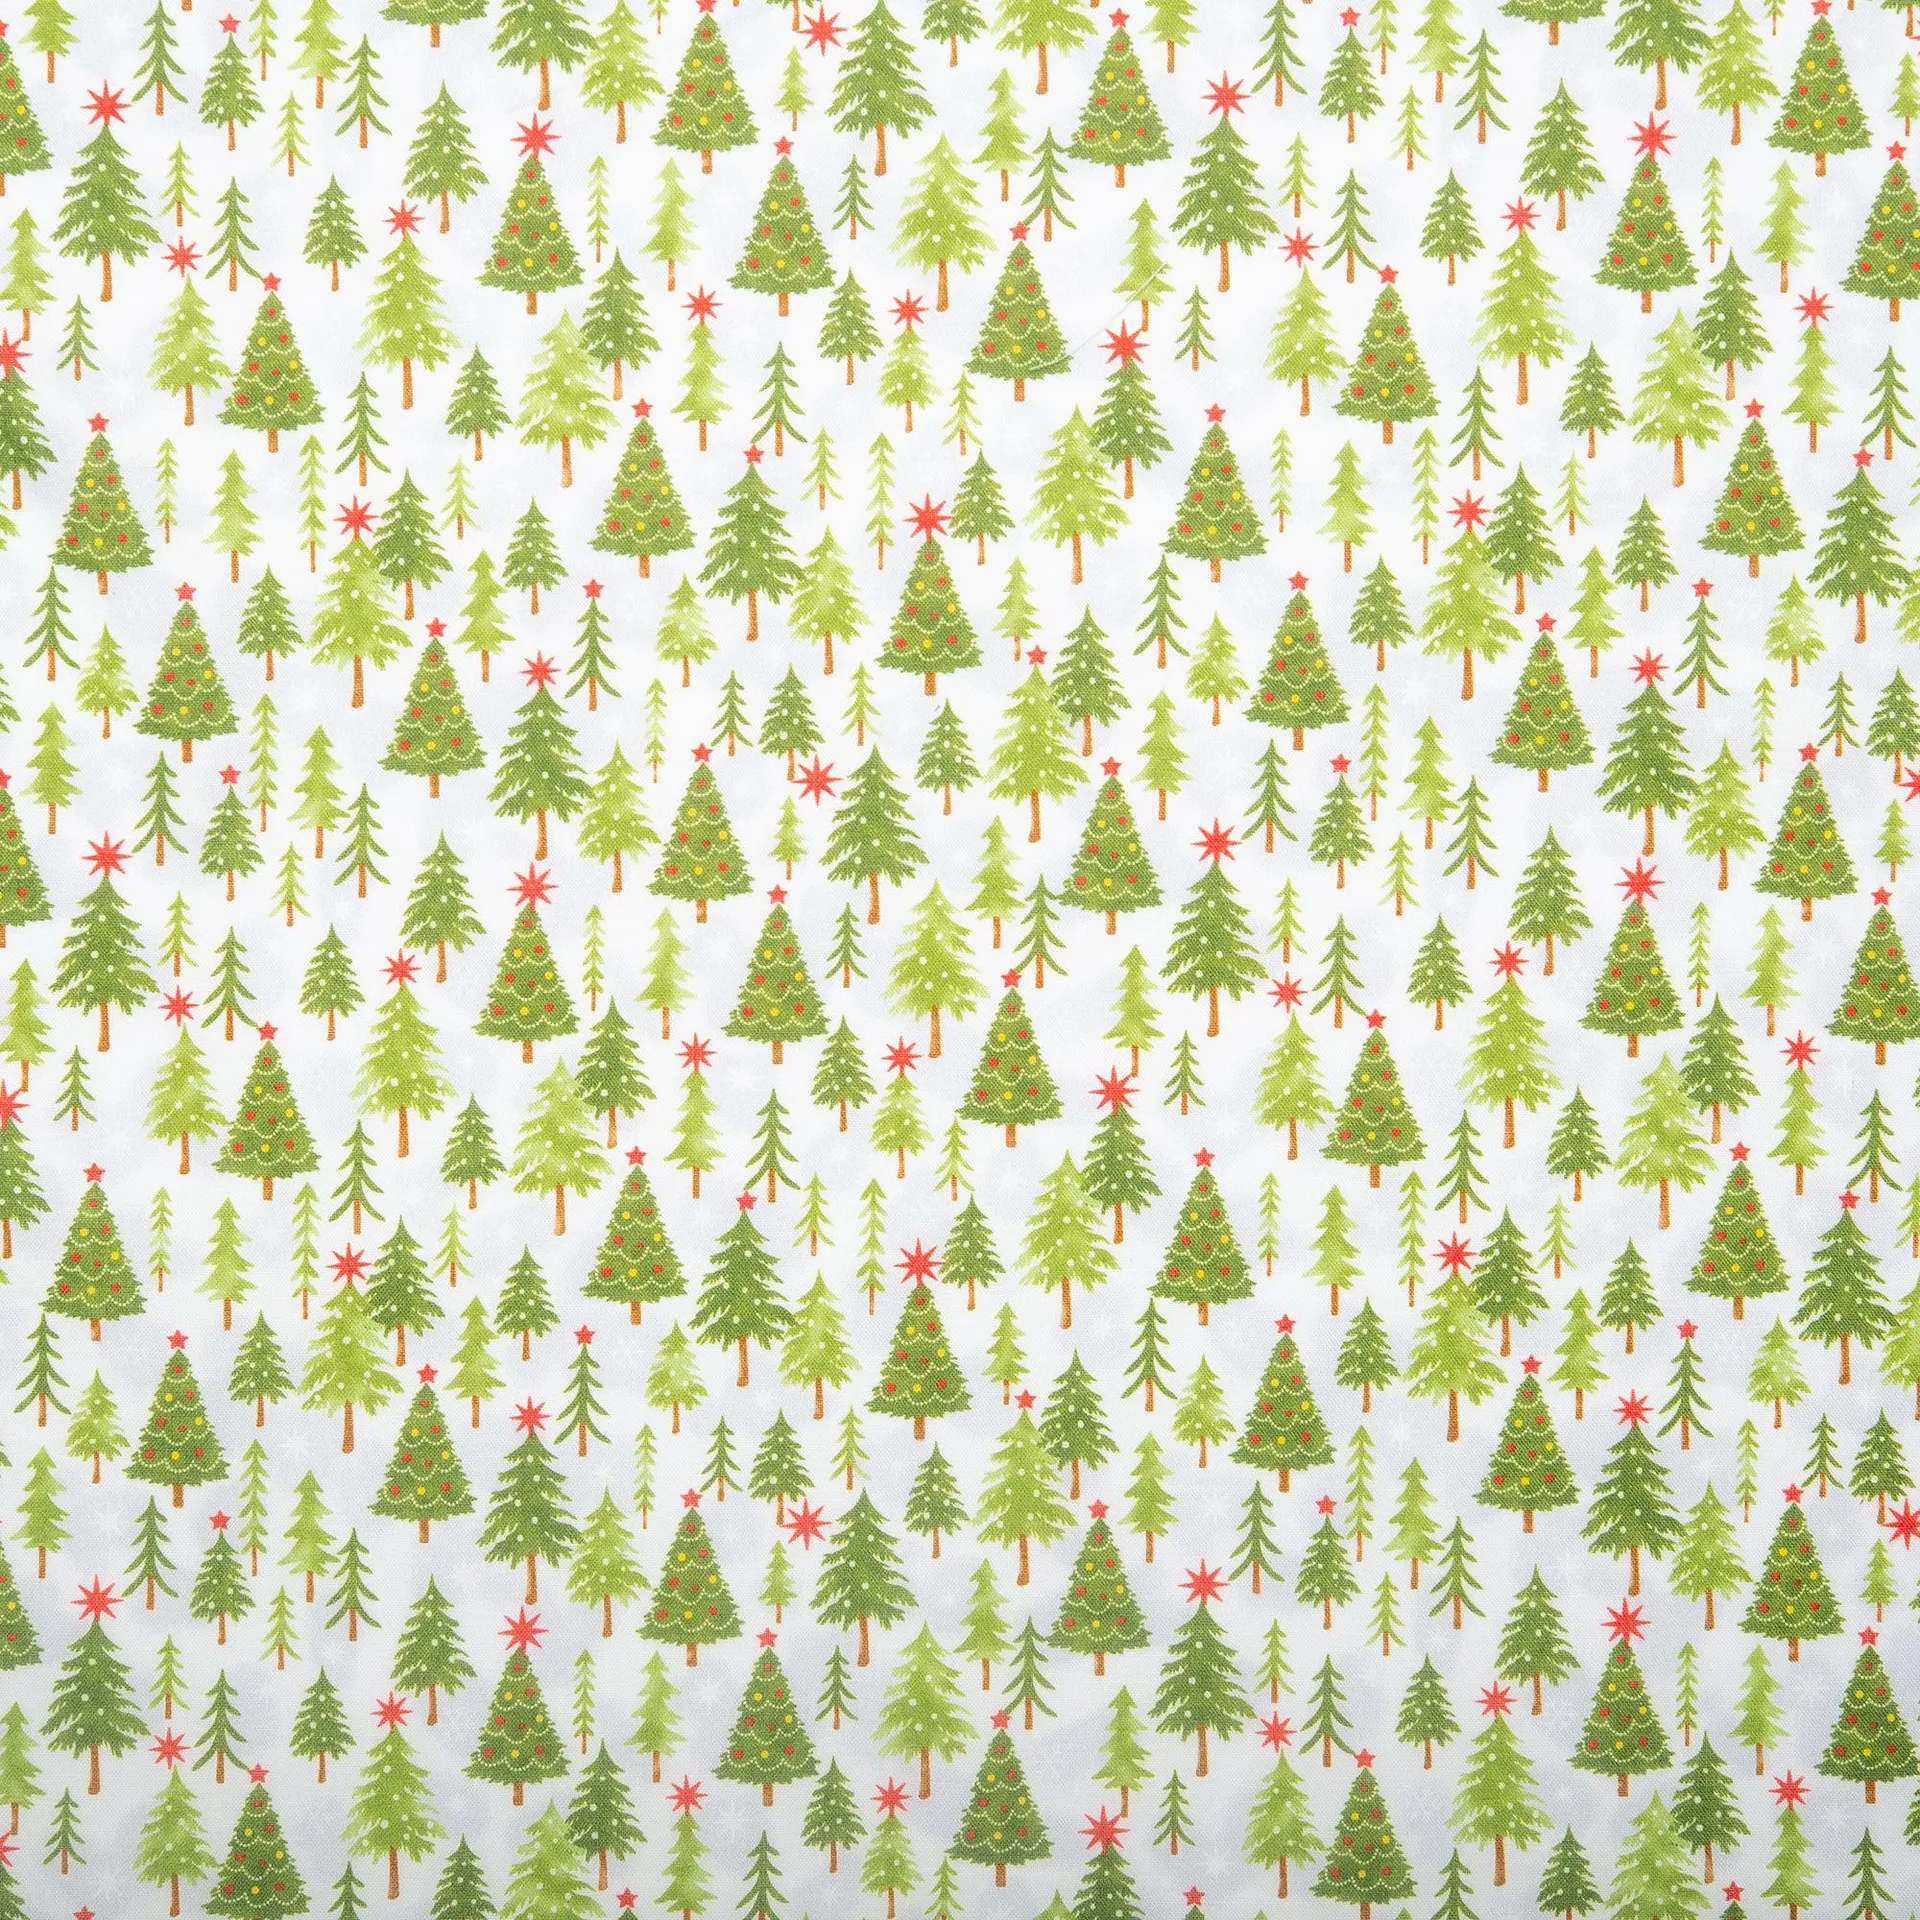 Printed Cotton - HOLIDAY MINIS - Firs - White